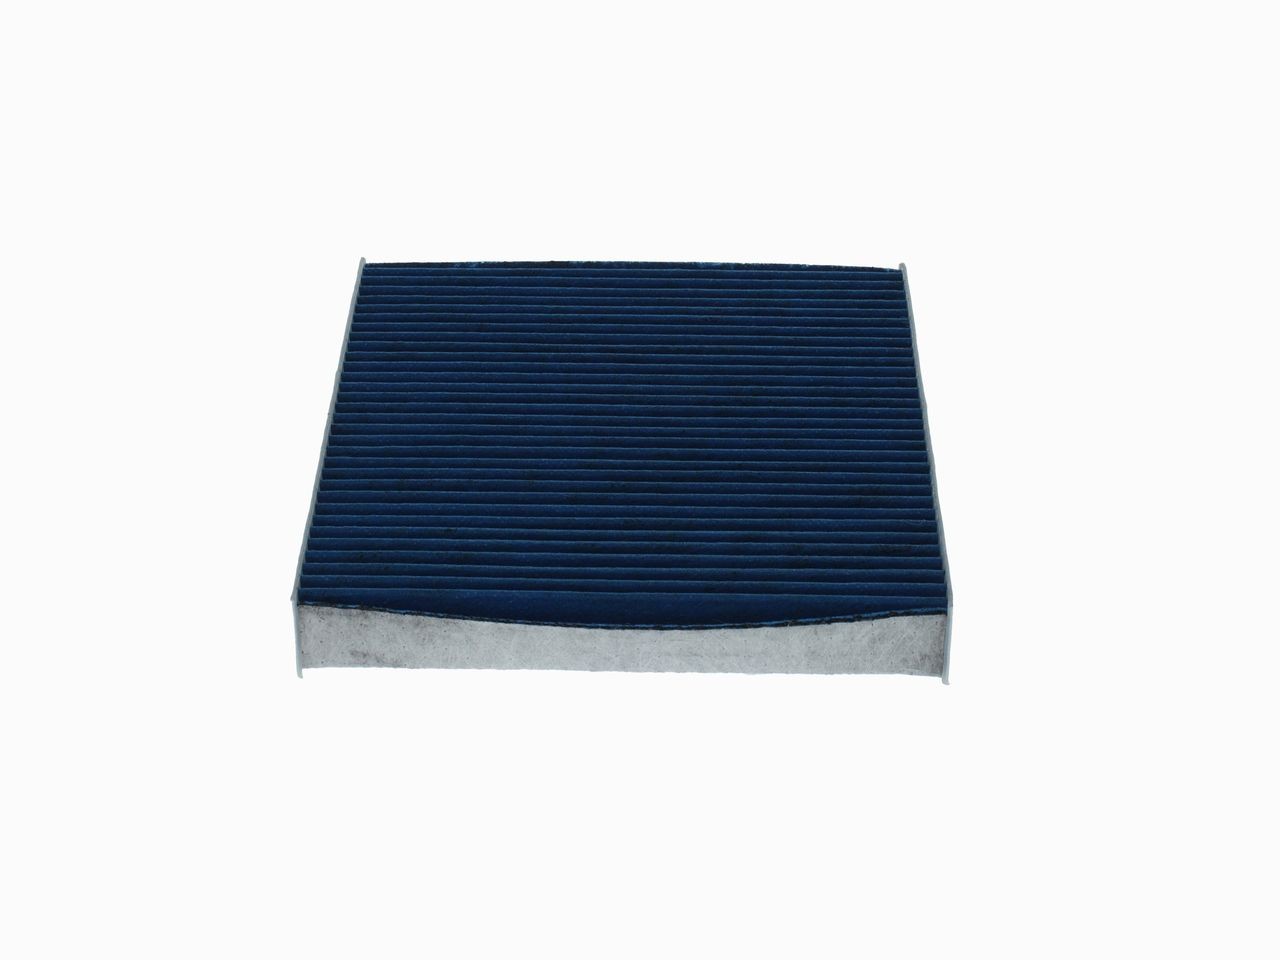 0986628604 Air con filter A 8604 BOSCH Activated Carbon Filter, with antibacterial action, Particle Separation Rate >98% for 2.5µm (fine matter), with anti-allergic effect, with antiviral effect, with fungicidal effect, 252 mm x 216 mm x 32 mm